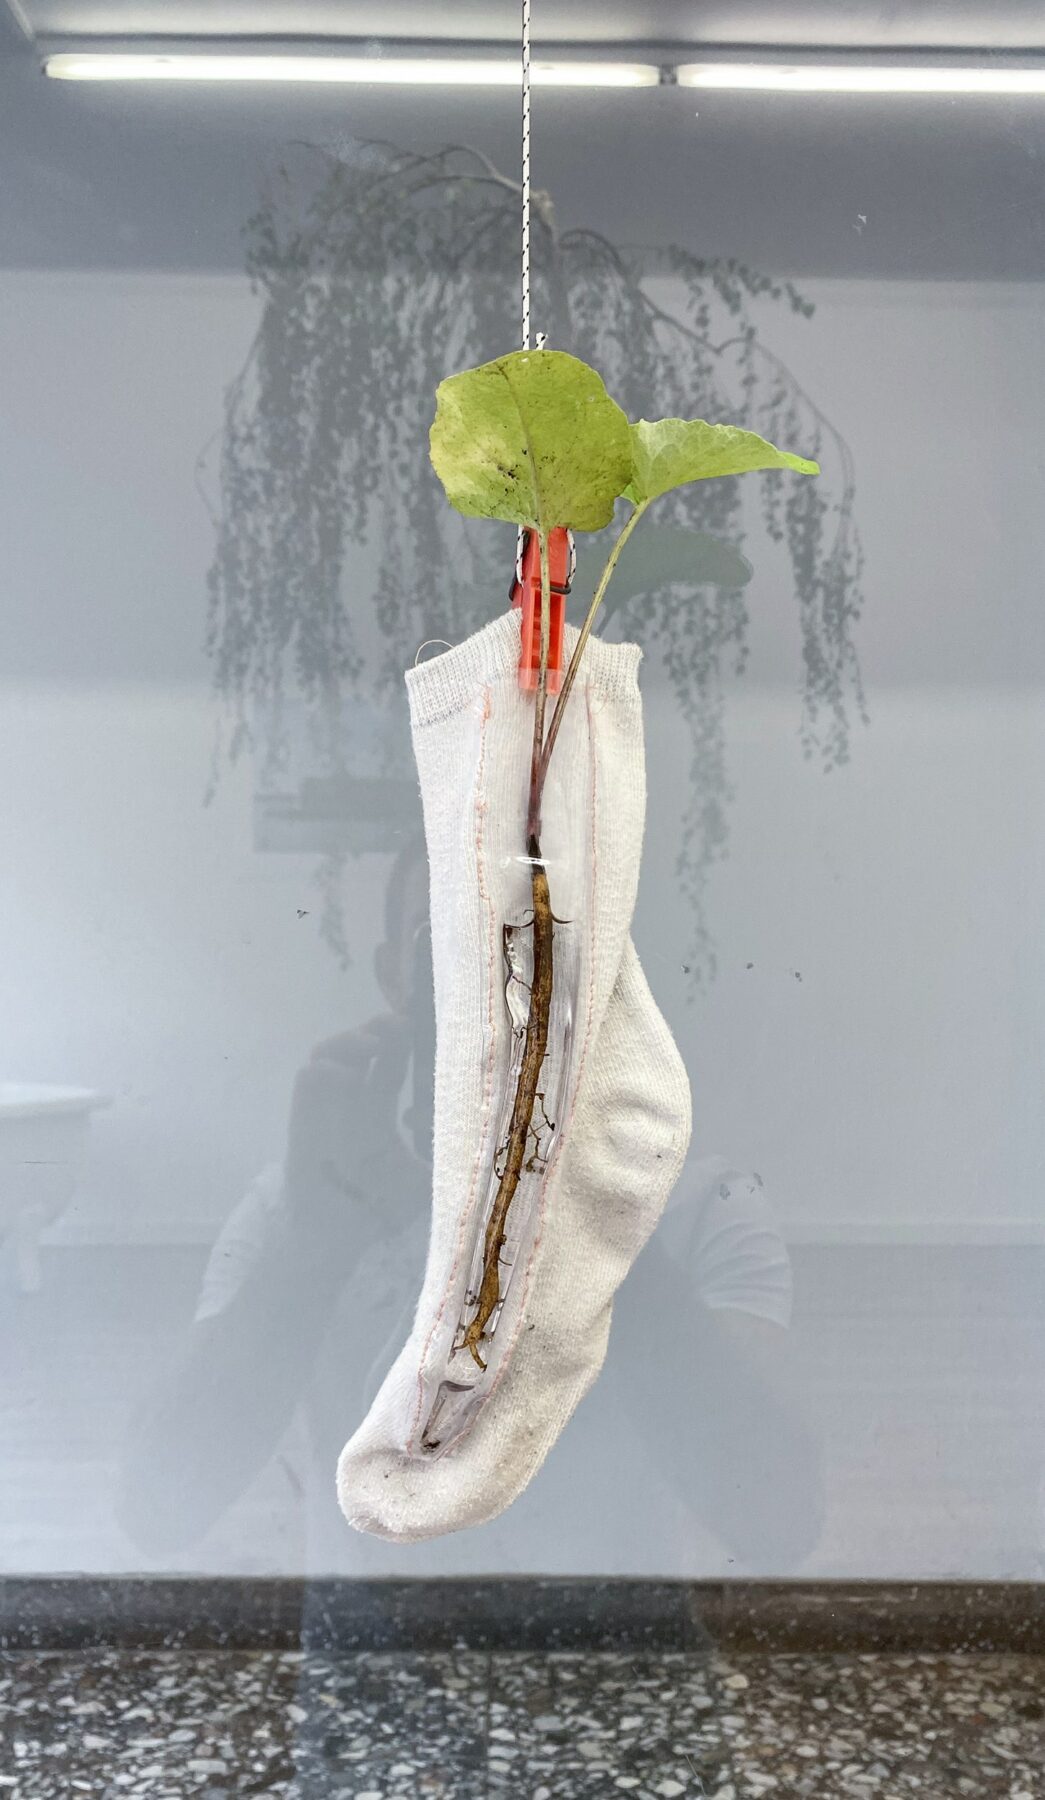 Jukai-Ryokō, "velcro sock", experiments with clothes and living plants, 2020